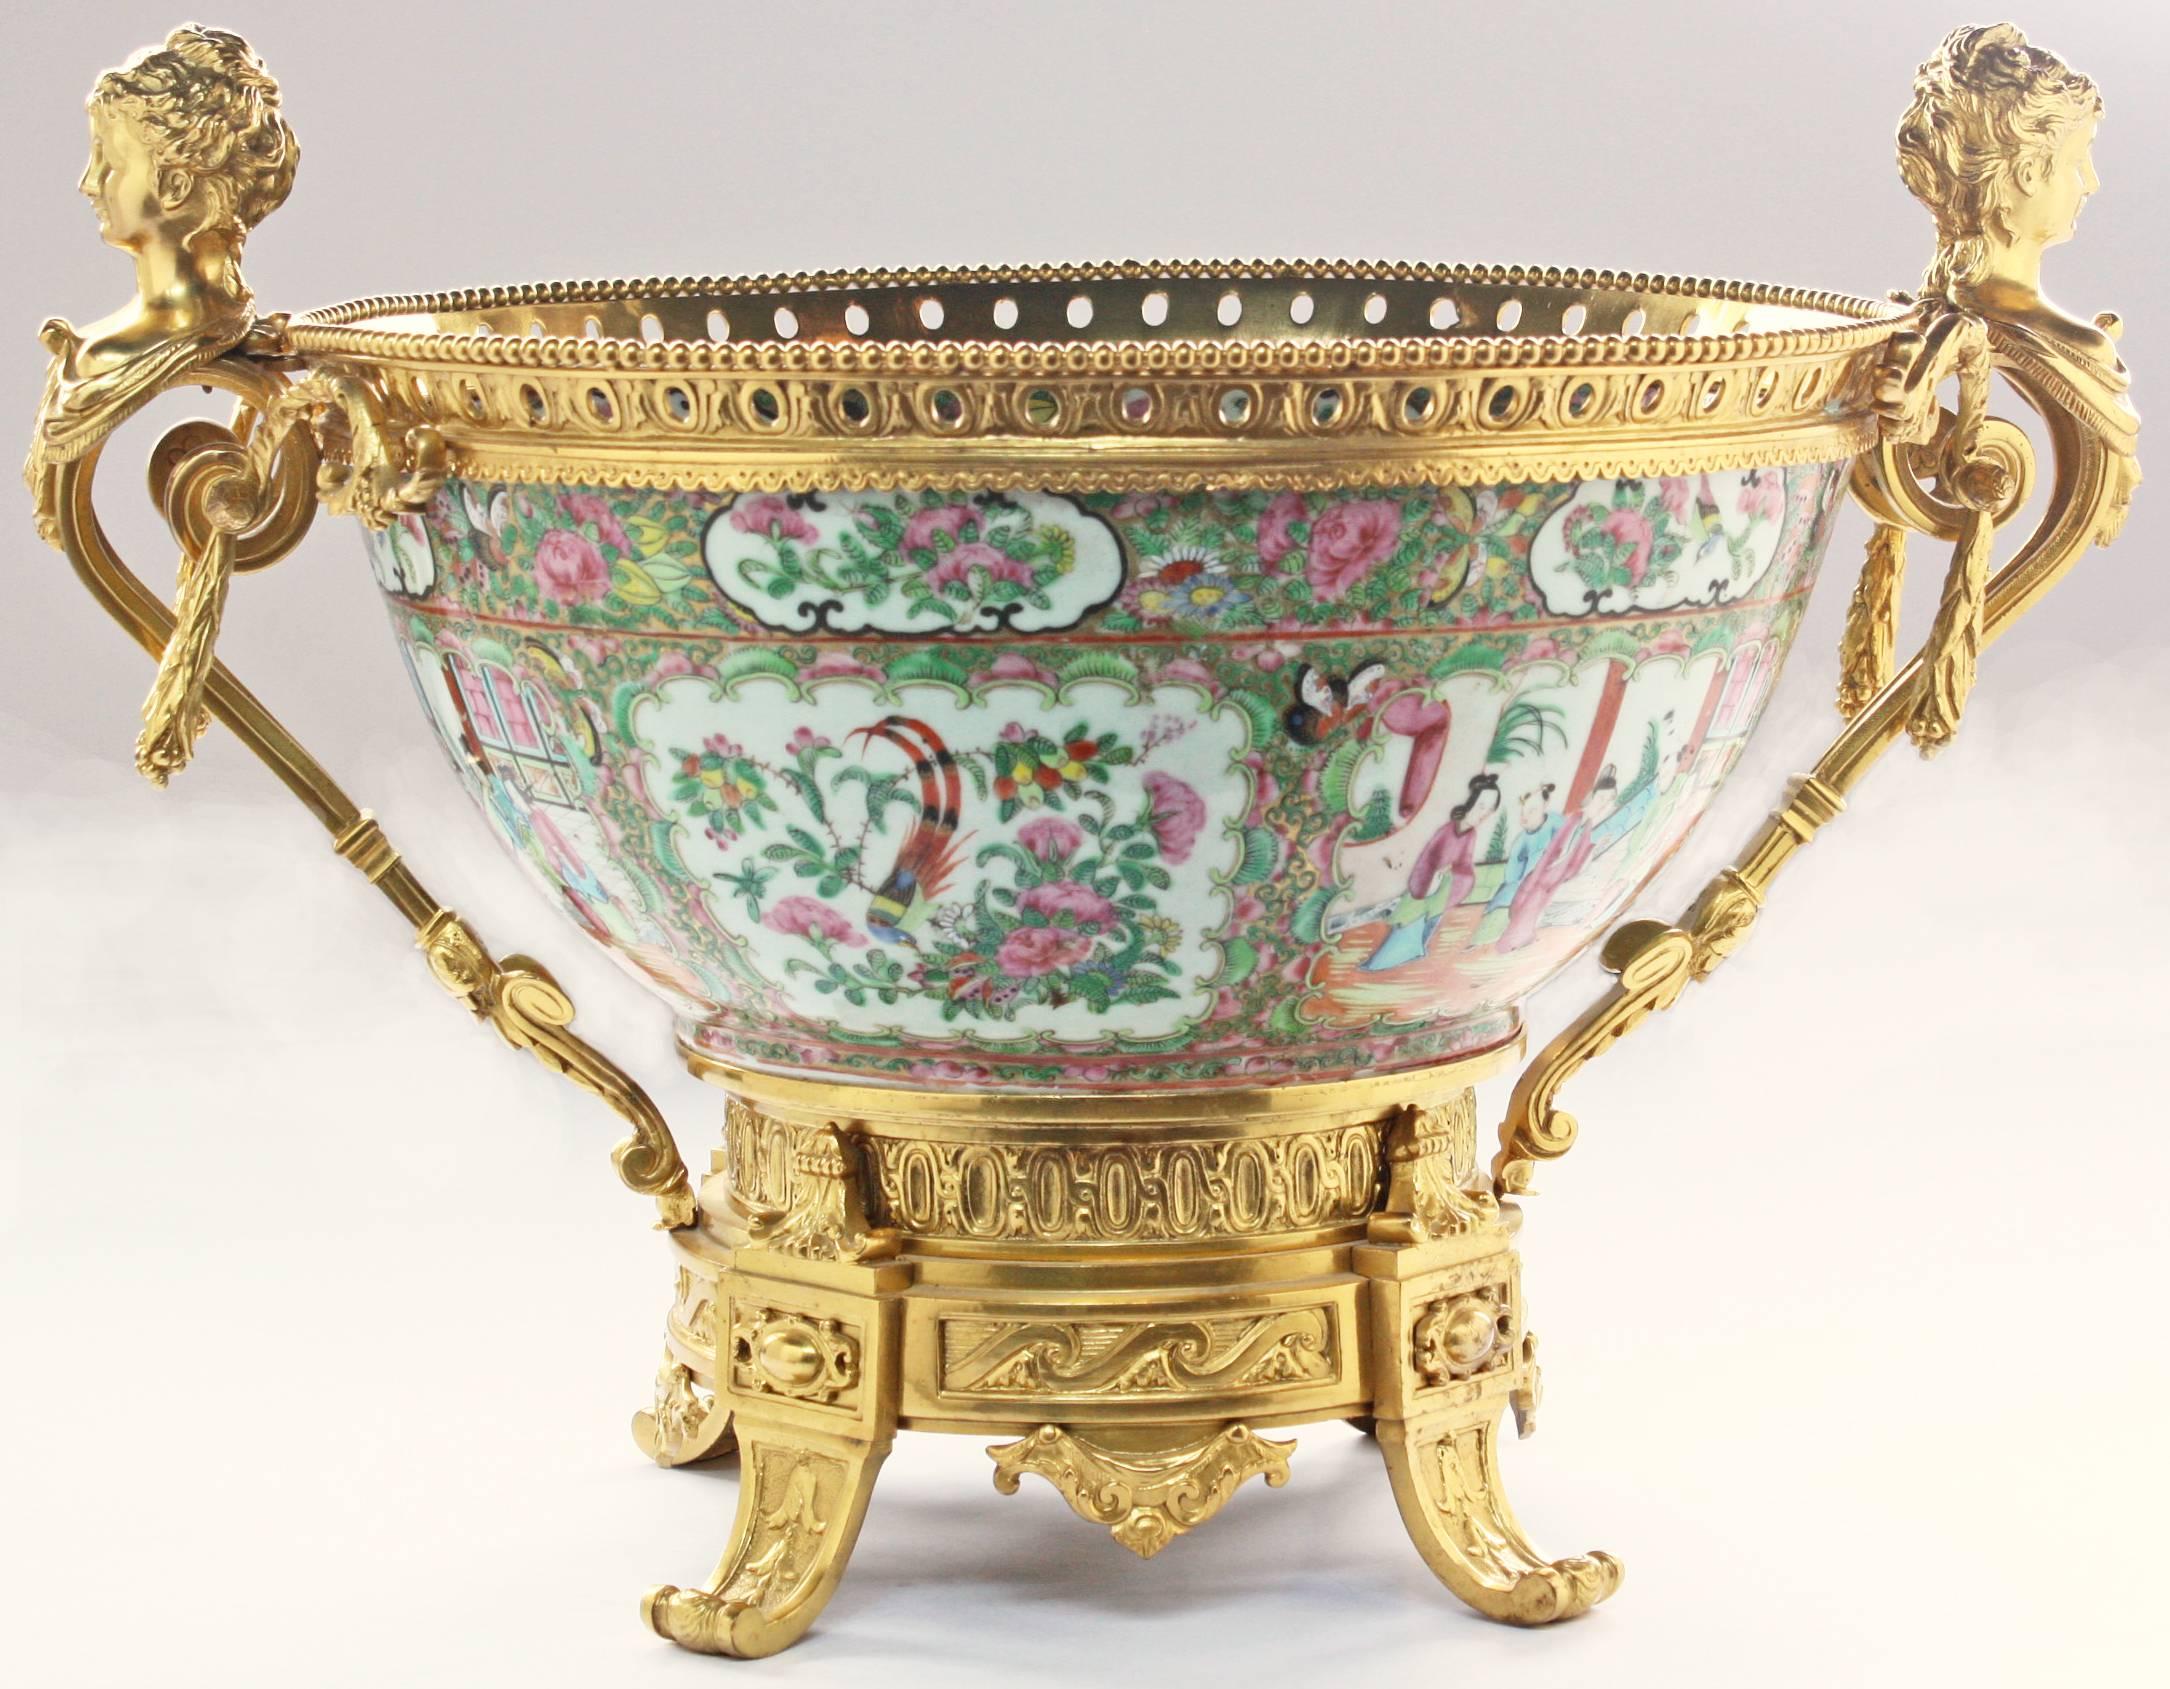 A large 19th century Chinese rose medallion bowl on footed gilt base with beaded band around rim with bust of ladies on each side.